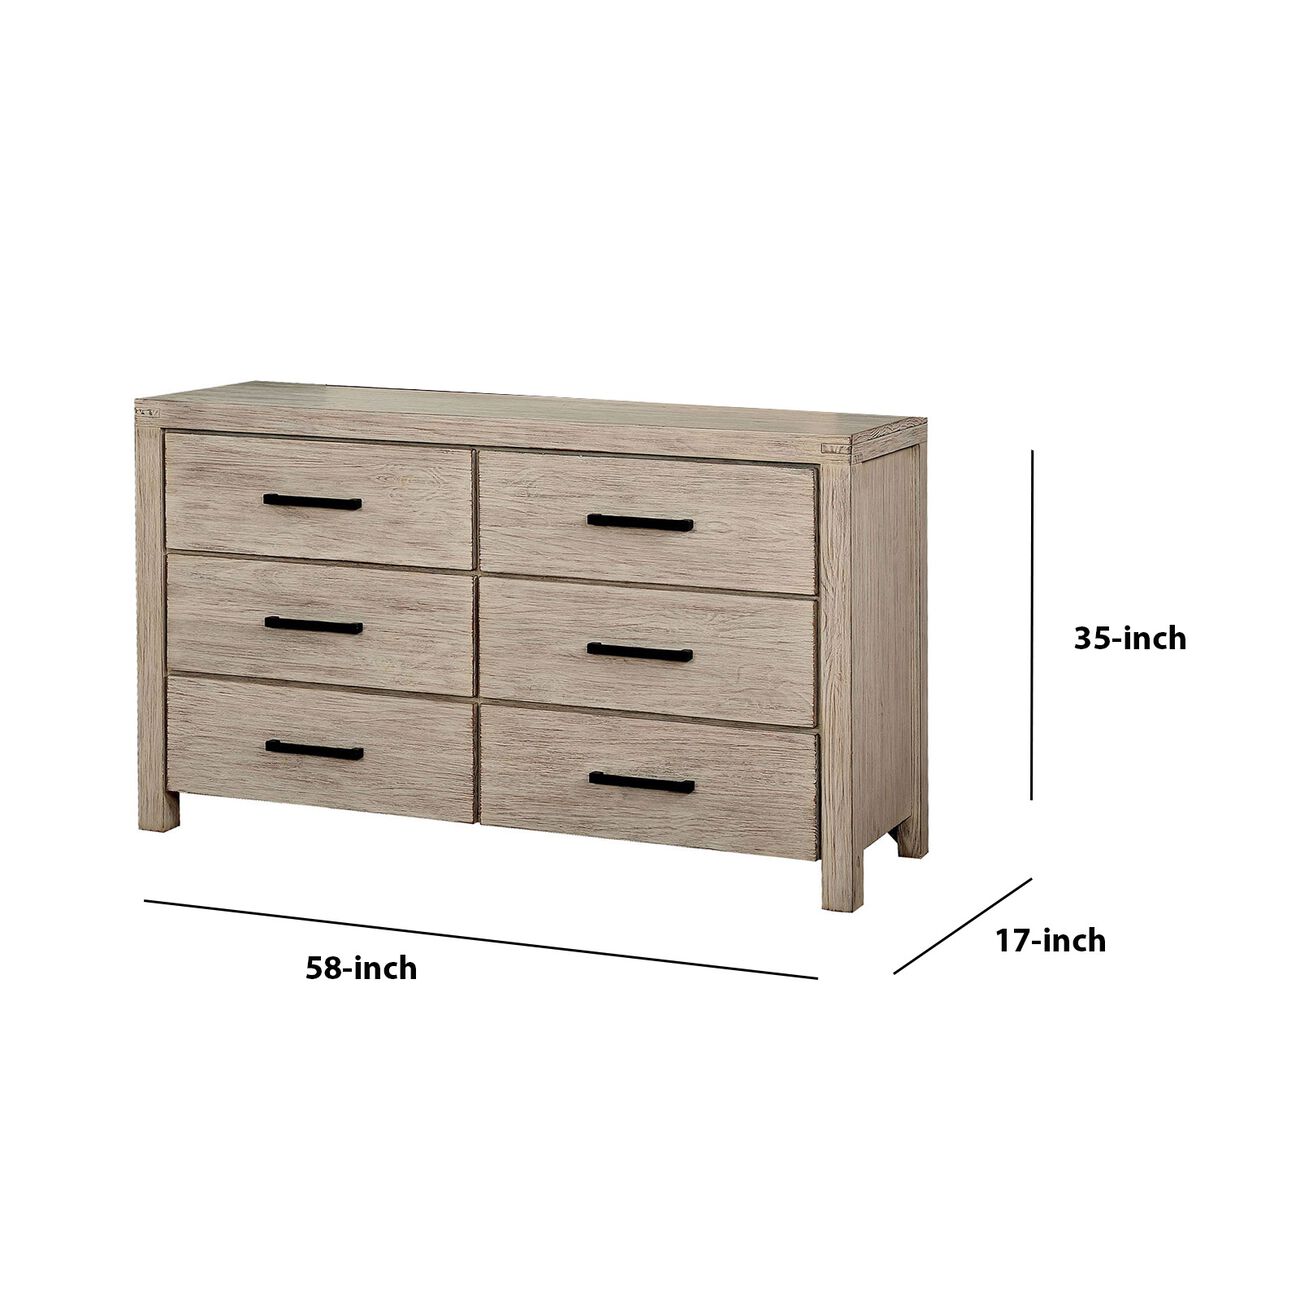 6 Drawer Rustic Style Wooden Dresser with Block Legs, White